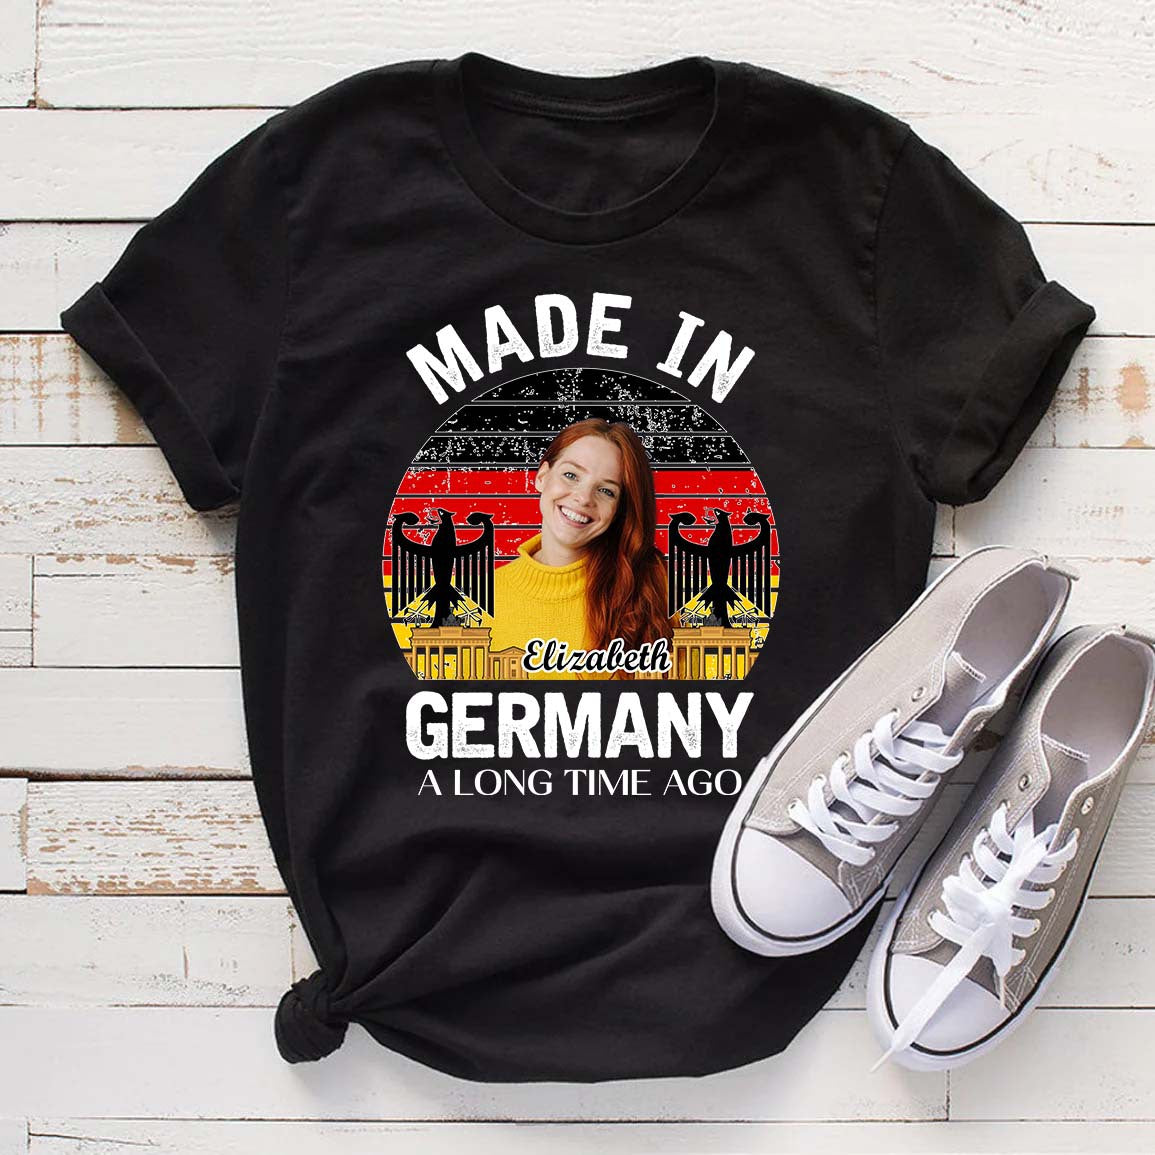 Custom Germany T-shirt, Made in Germany A Long Time Ago